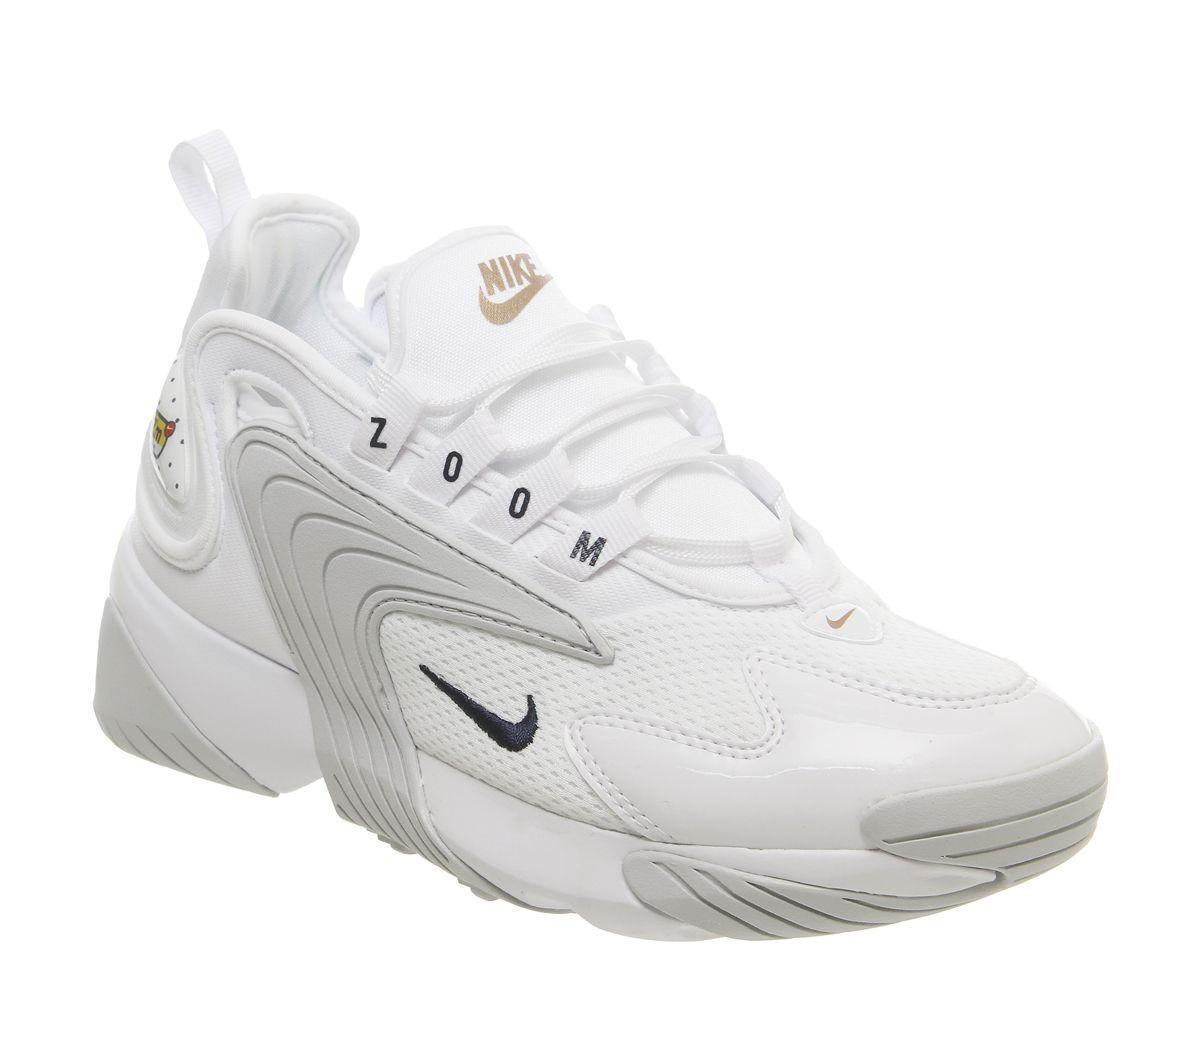 Nike Rubber Zoom 2k Trainers in White 